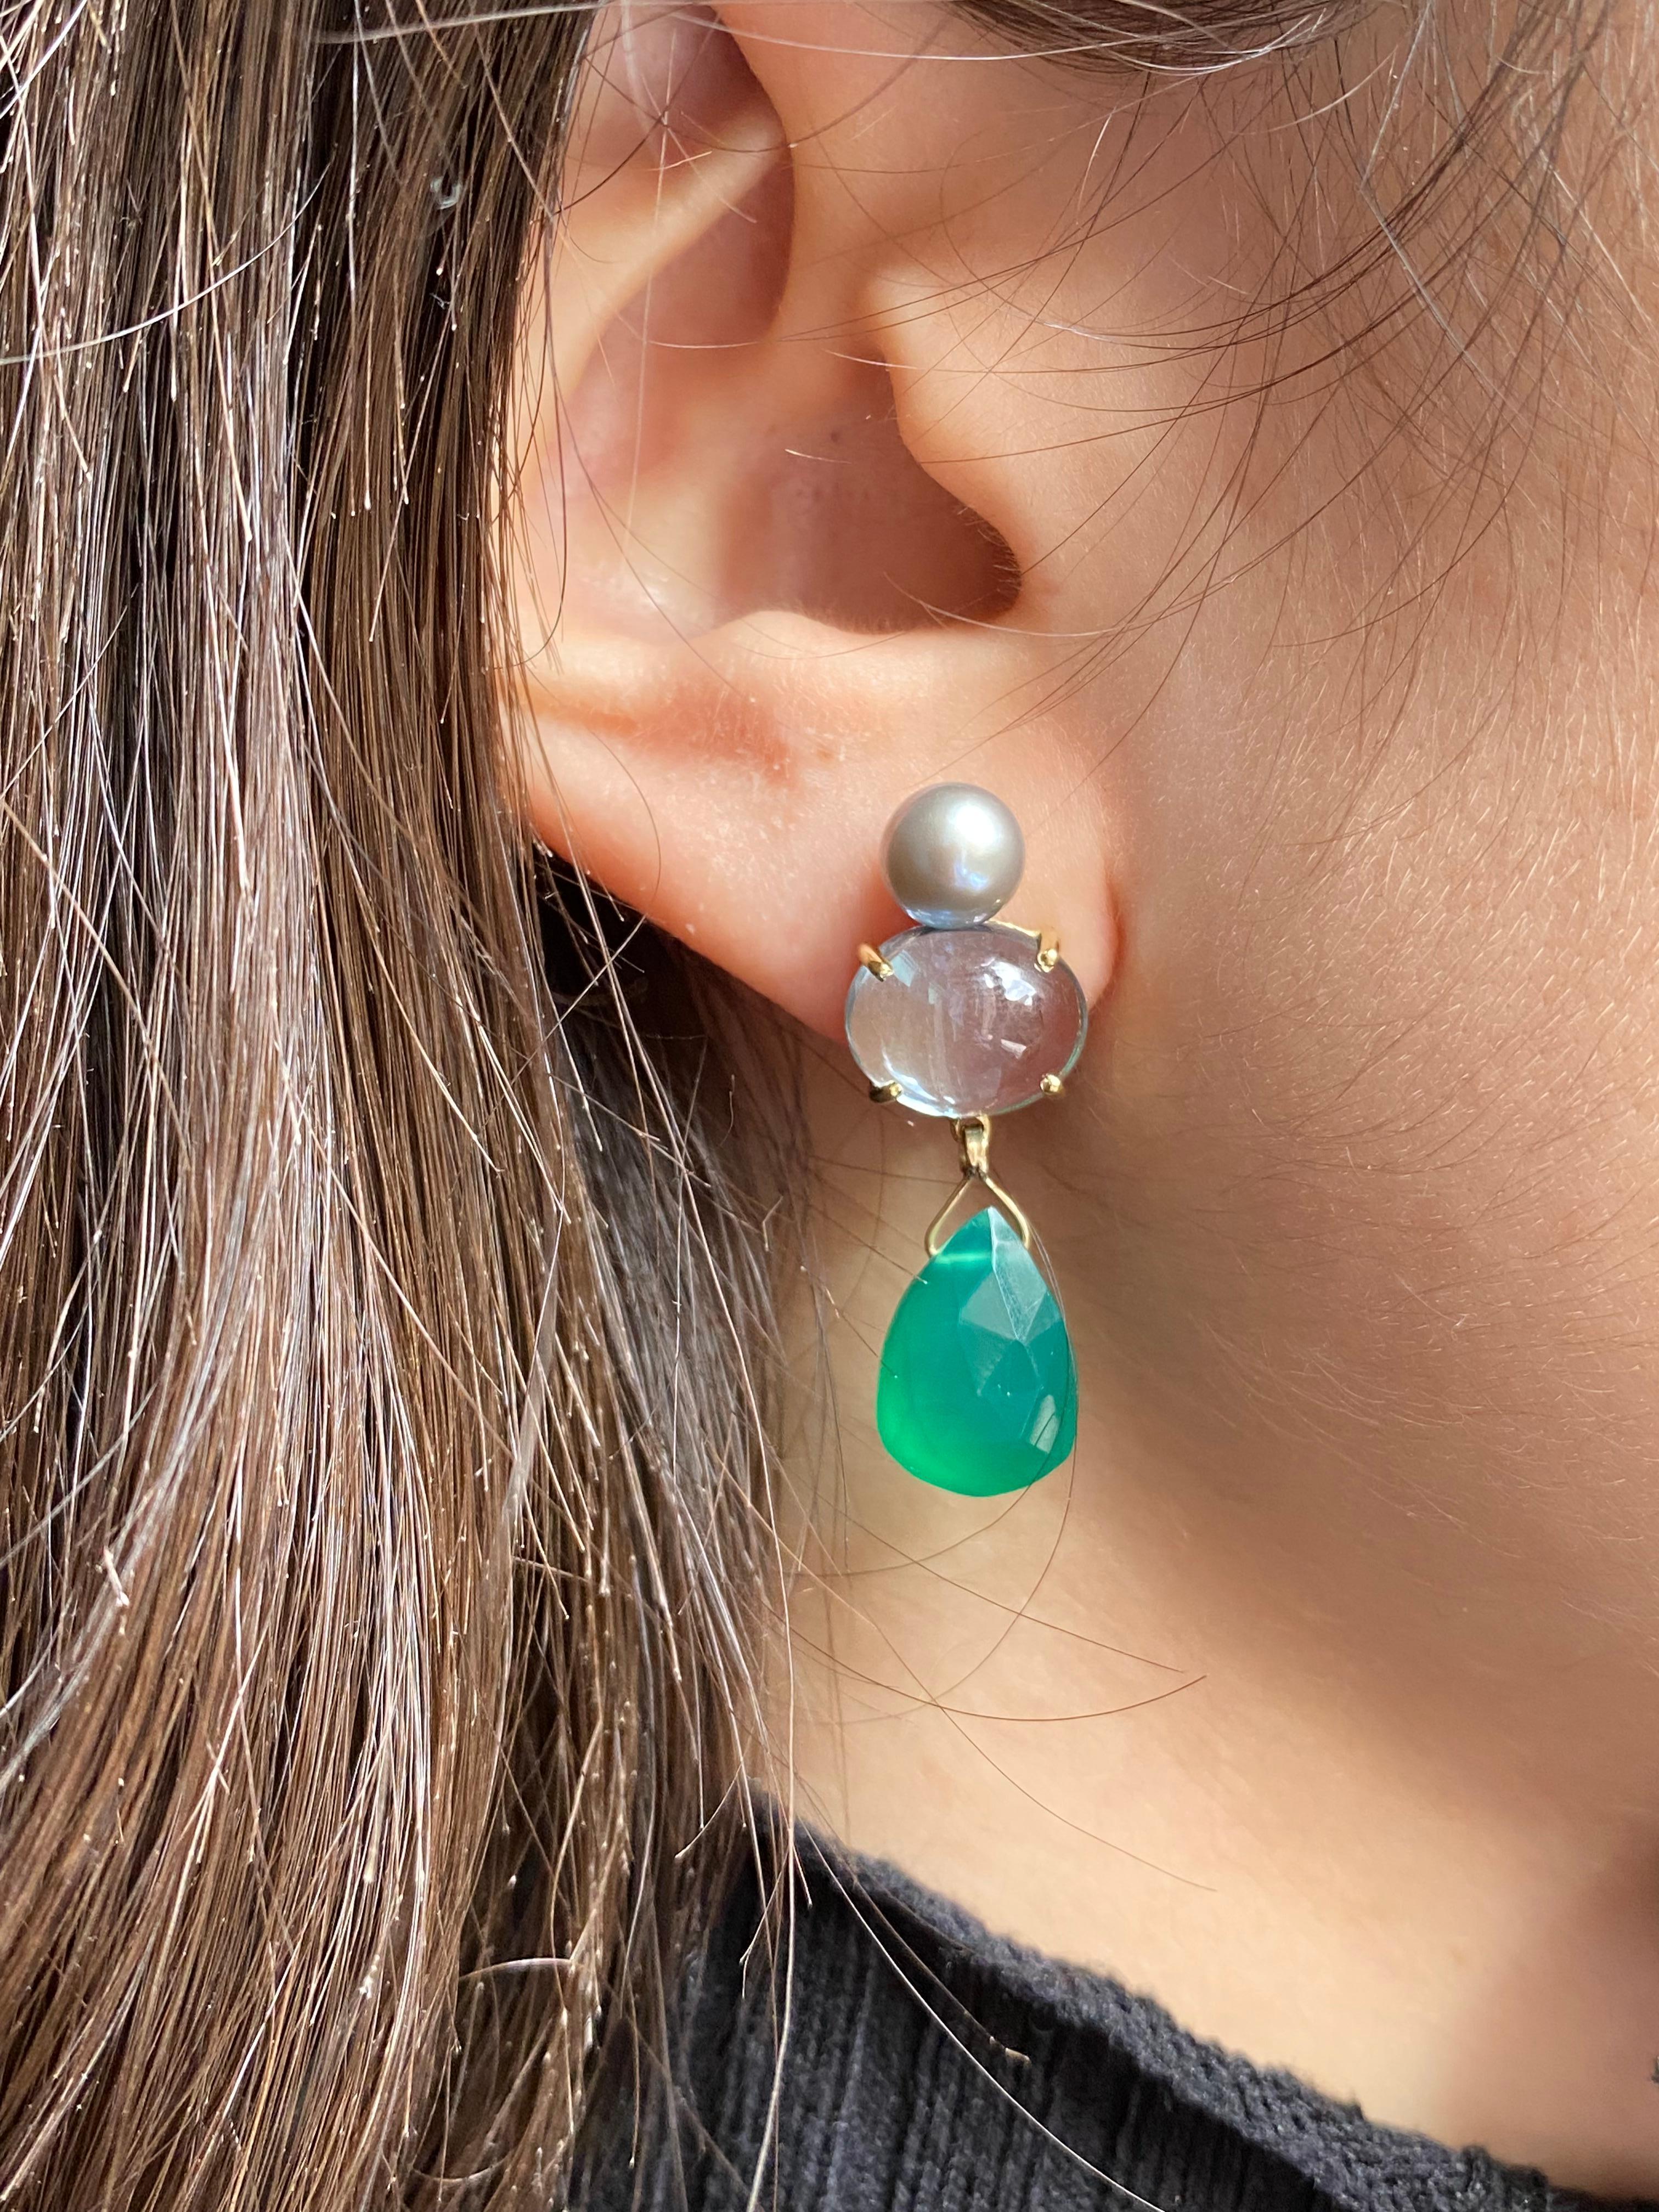 Rossella Ugolini Design Collection, a beautiful shade of light blue and green made in 18 Karat White Gold Light Blue Topaz Green Agate. These contemporary Design earrings are handcrafted in 18 Karats Yellow Gold  easy wear. Simple and elegant with a